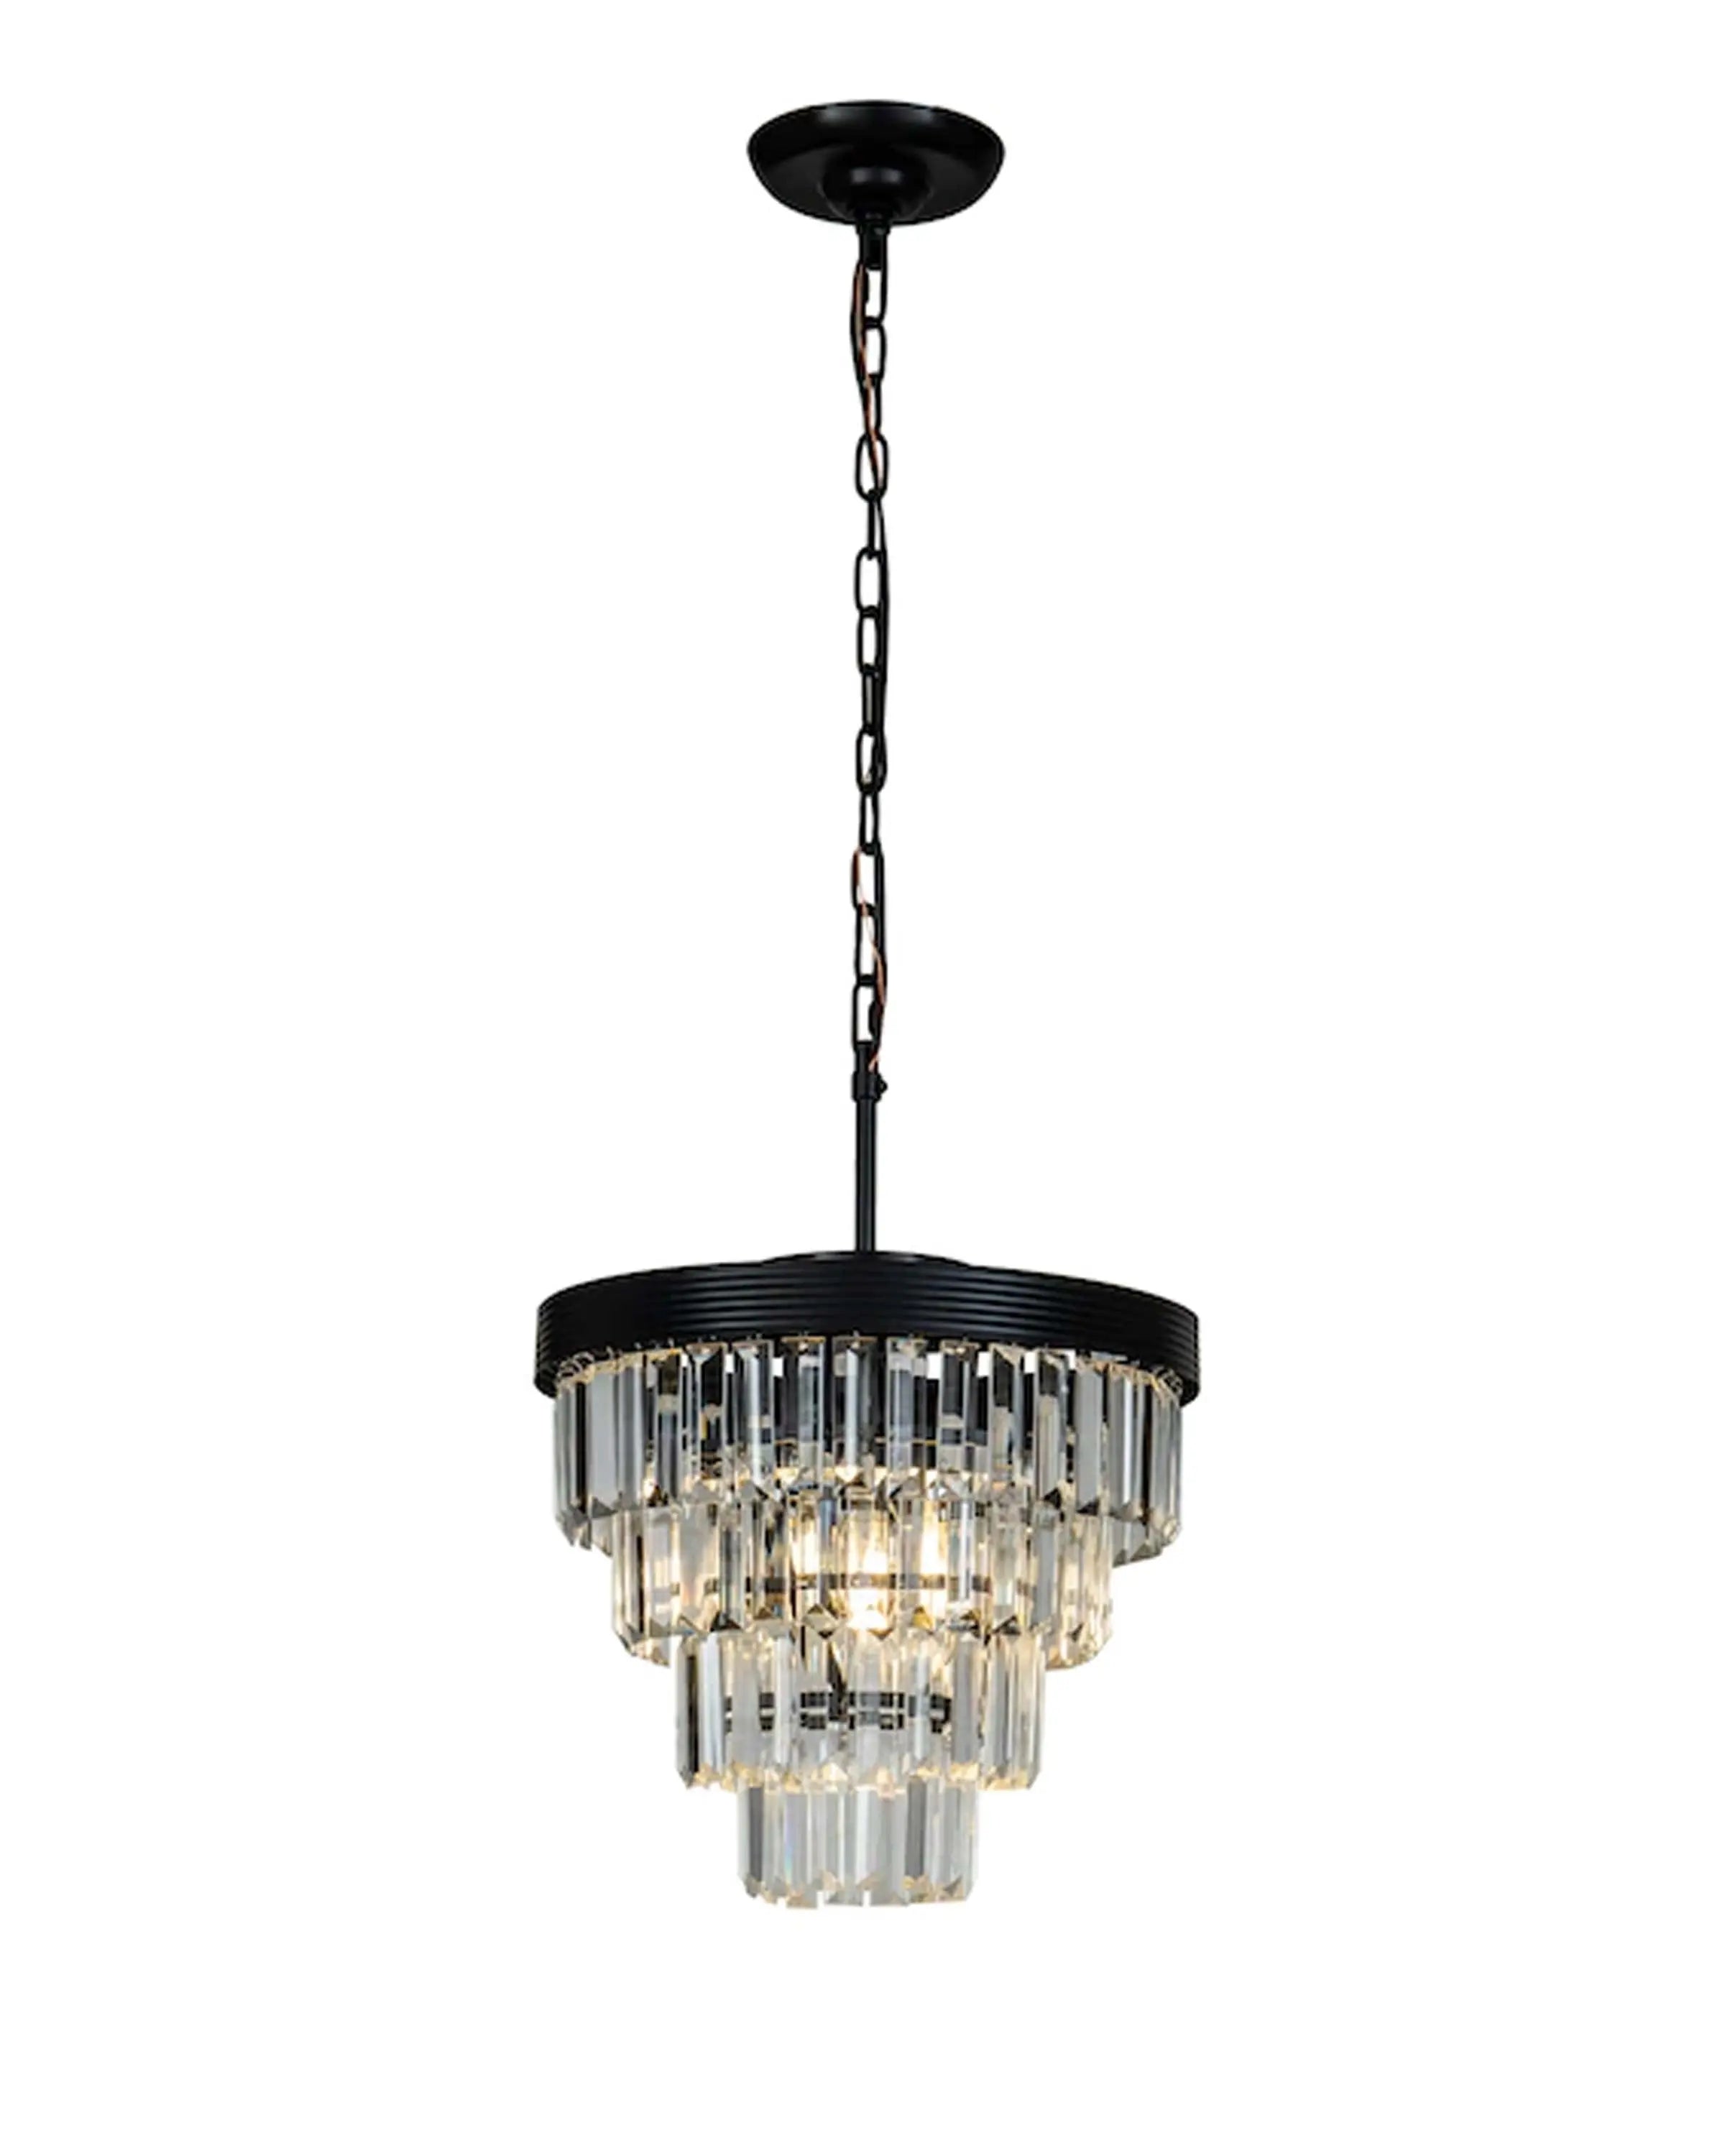 CAUCASUS  Classic Crystal Chandelier ANGIE HOMES